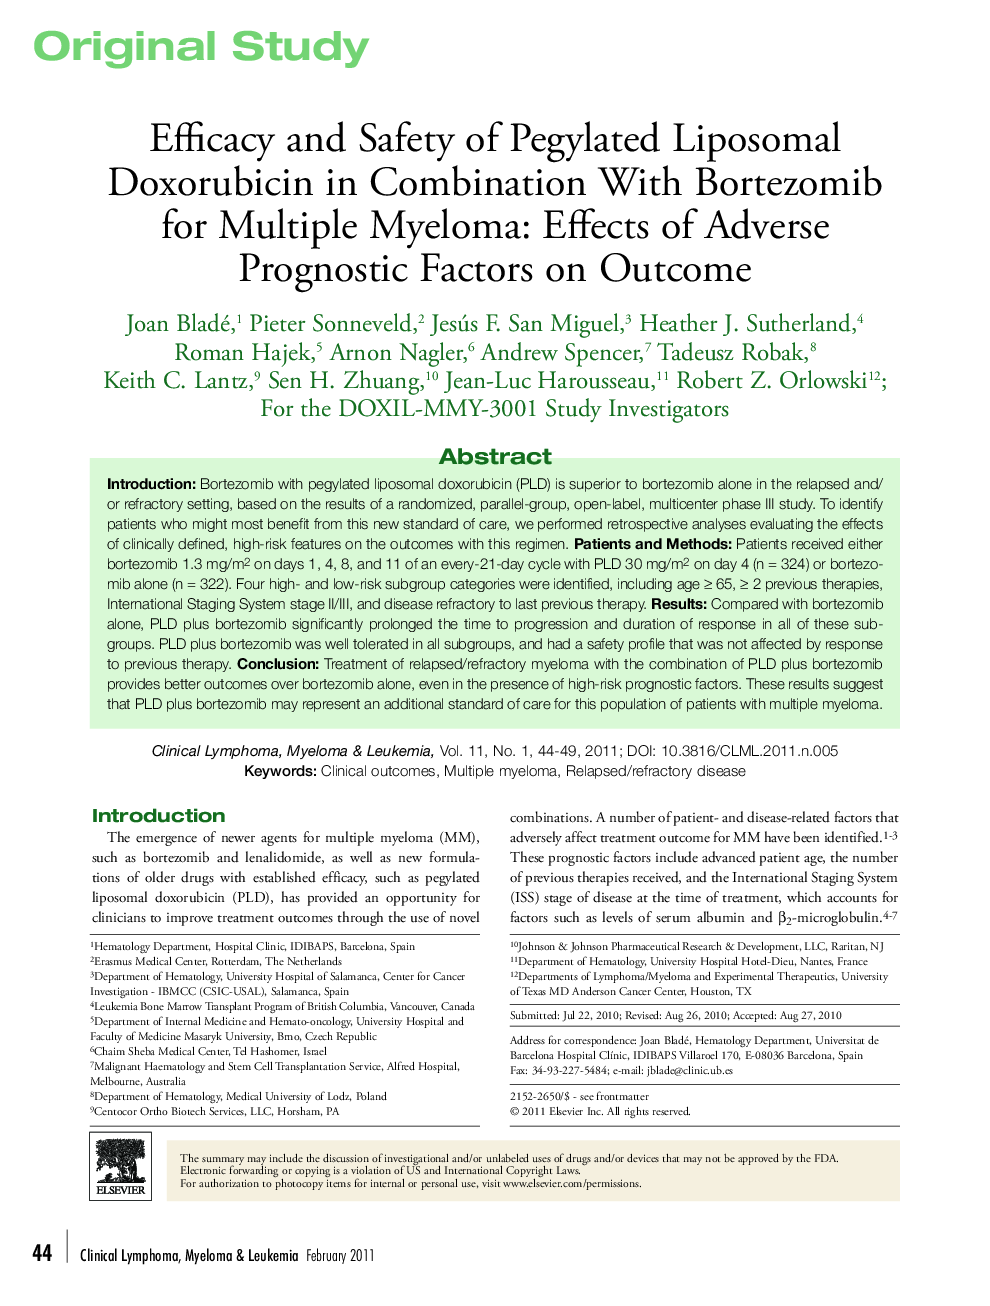 Efficacy and Safety of Pegylated Liposomal Doxorubicin in Combination With Bortezomib for Multiple Myeloma: Effects of Adverse Prognostic Factors on Outcome 